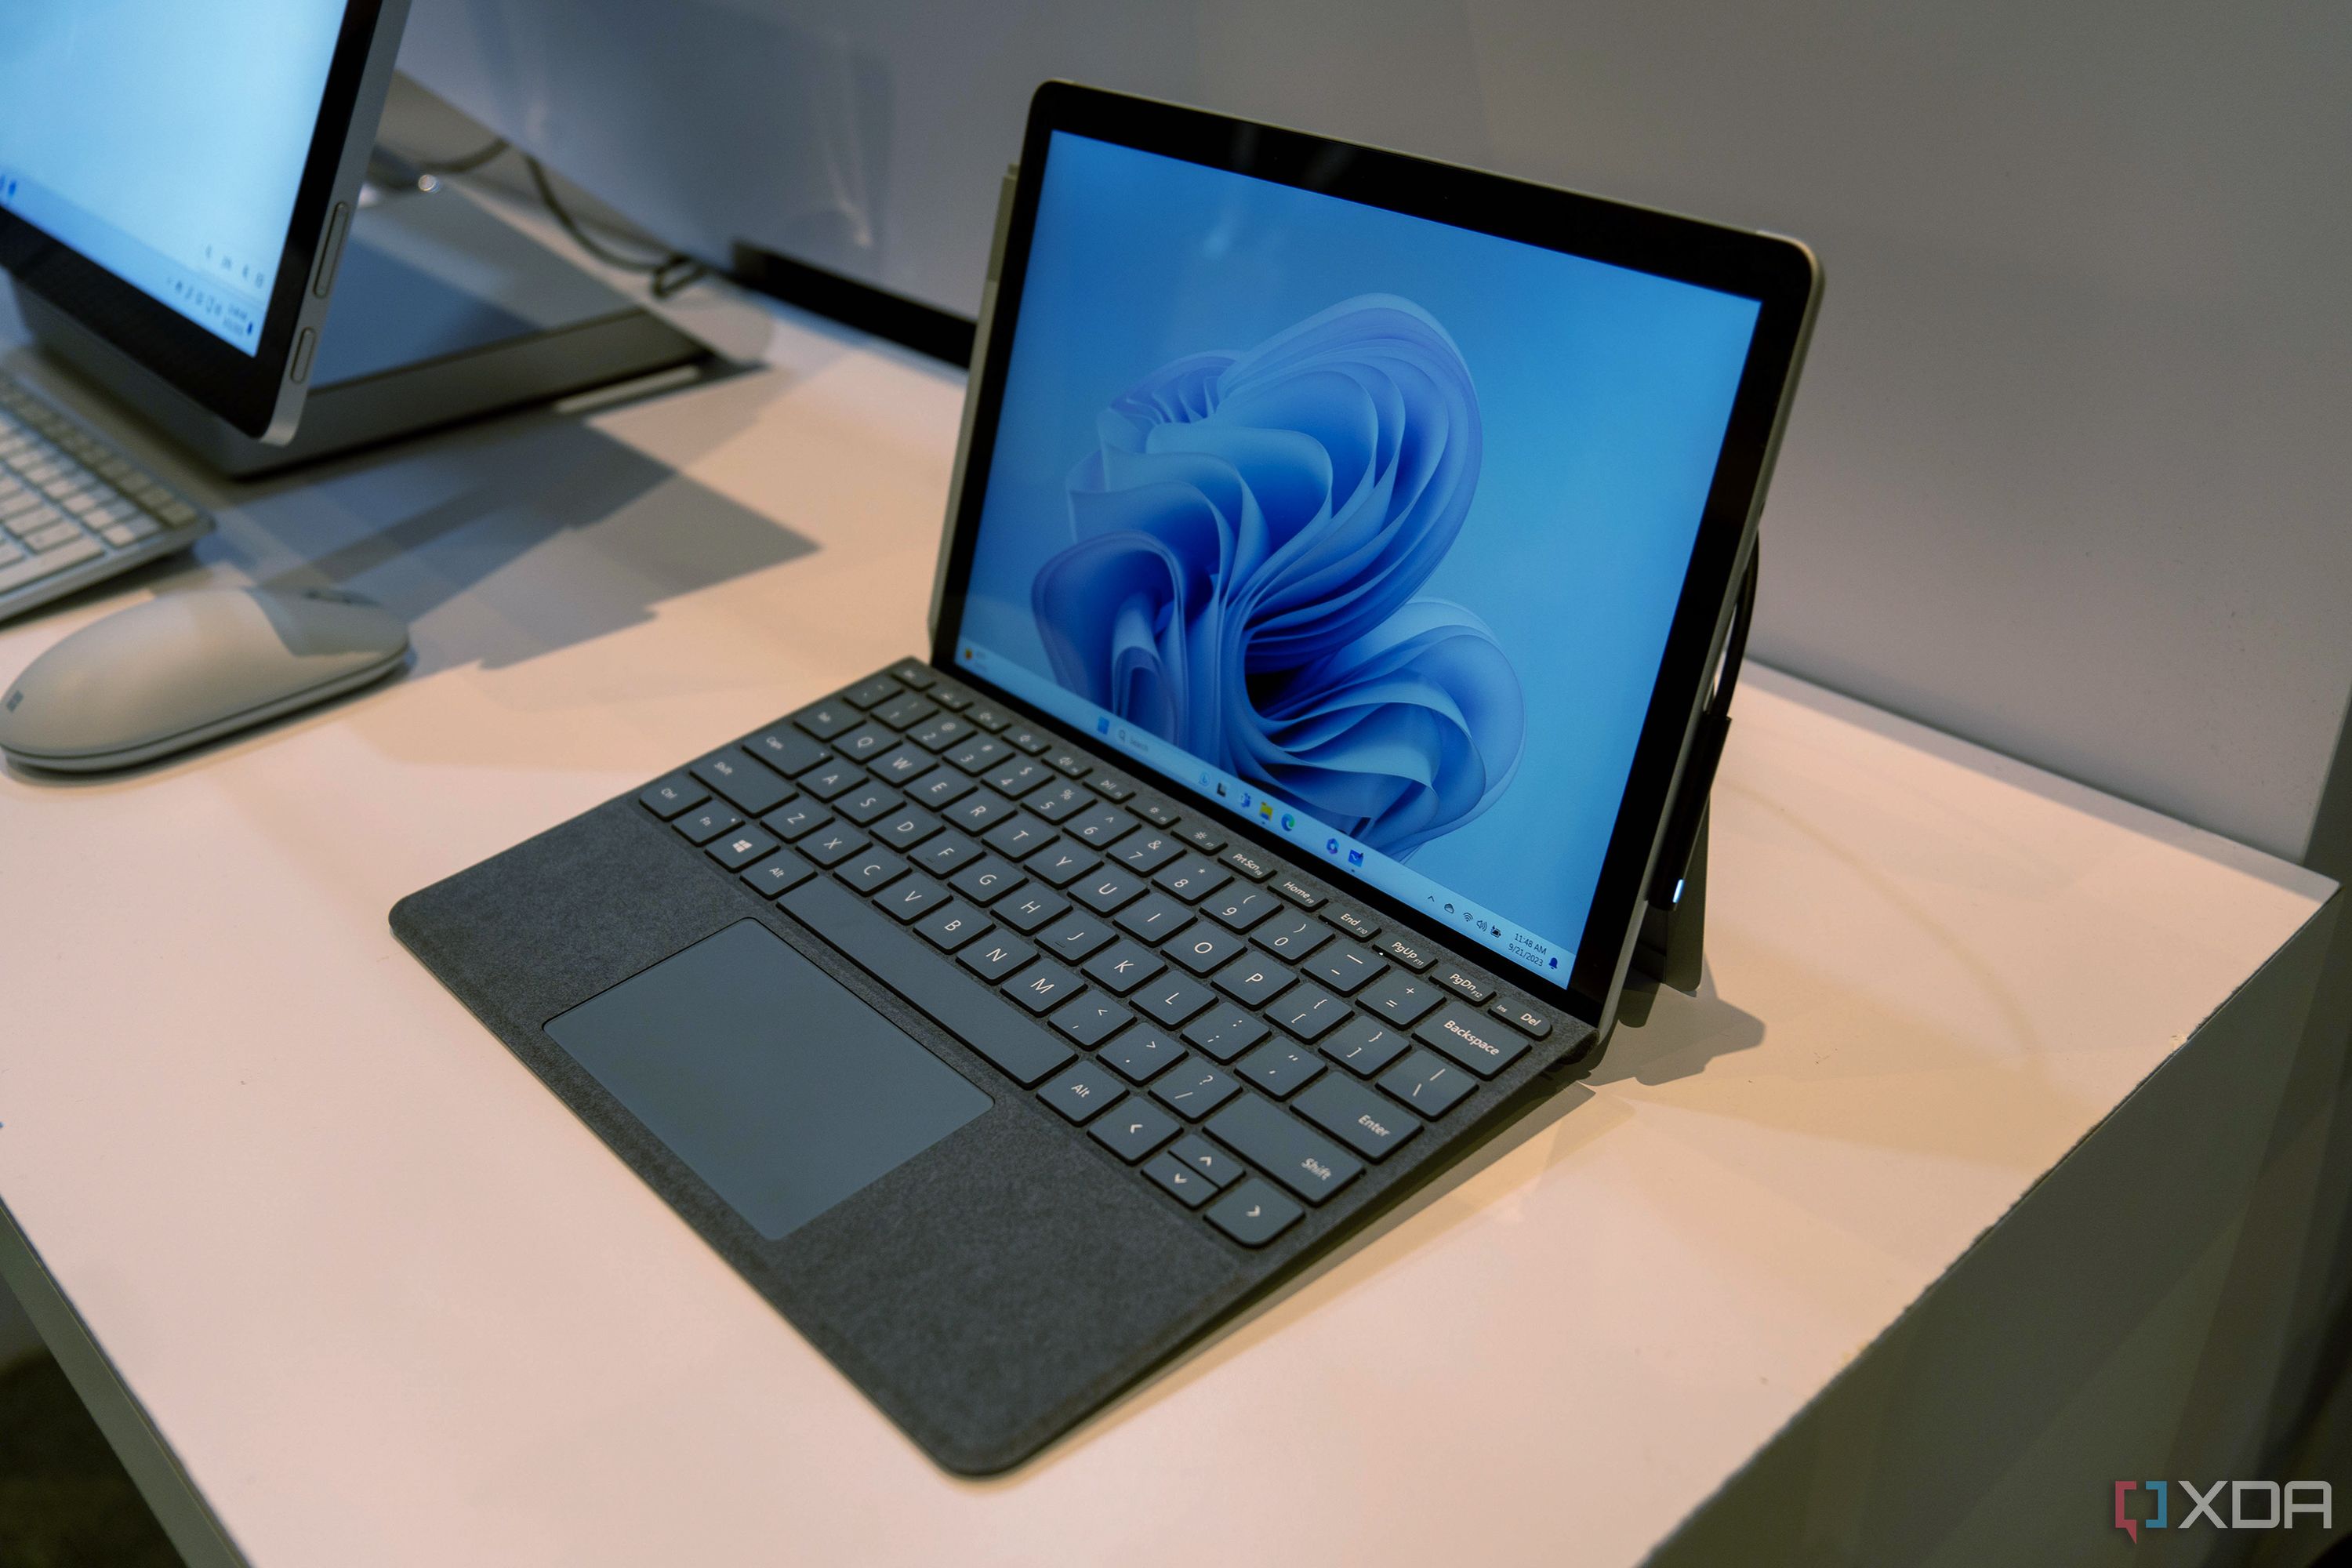 Microsoft Surface Go 4 vs. Surface Go 3: Is the business refresh a winner?